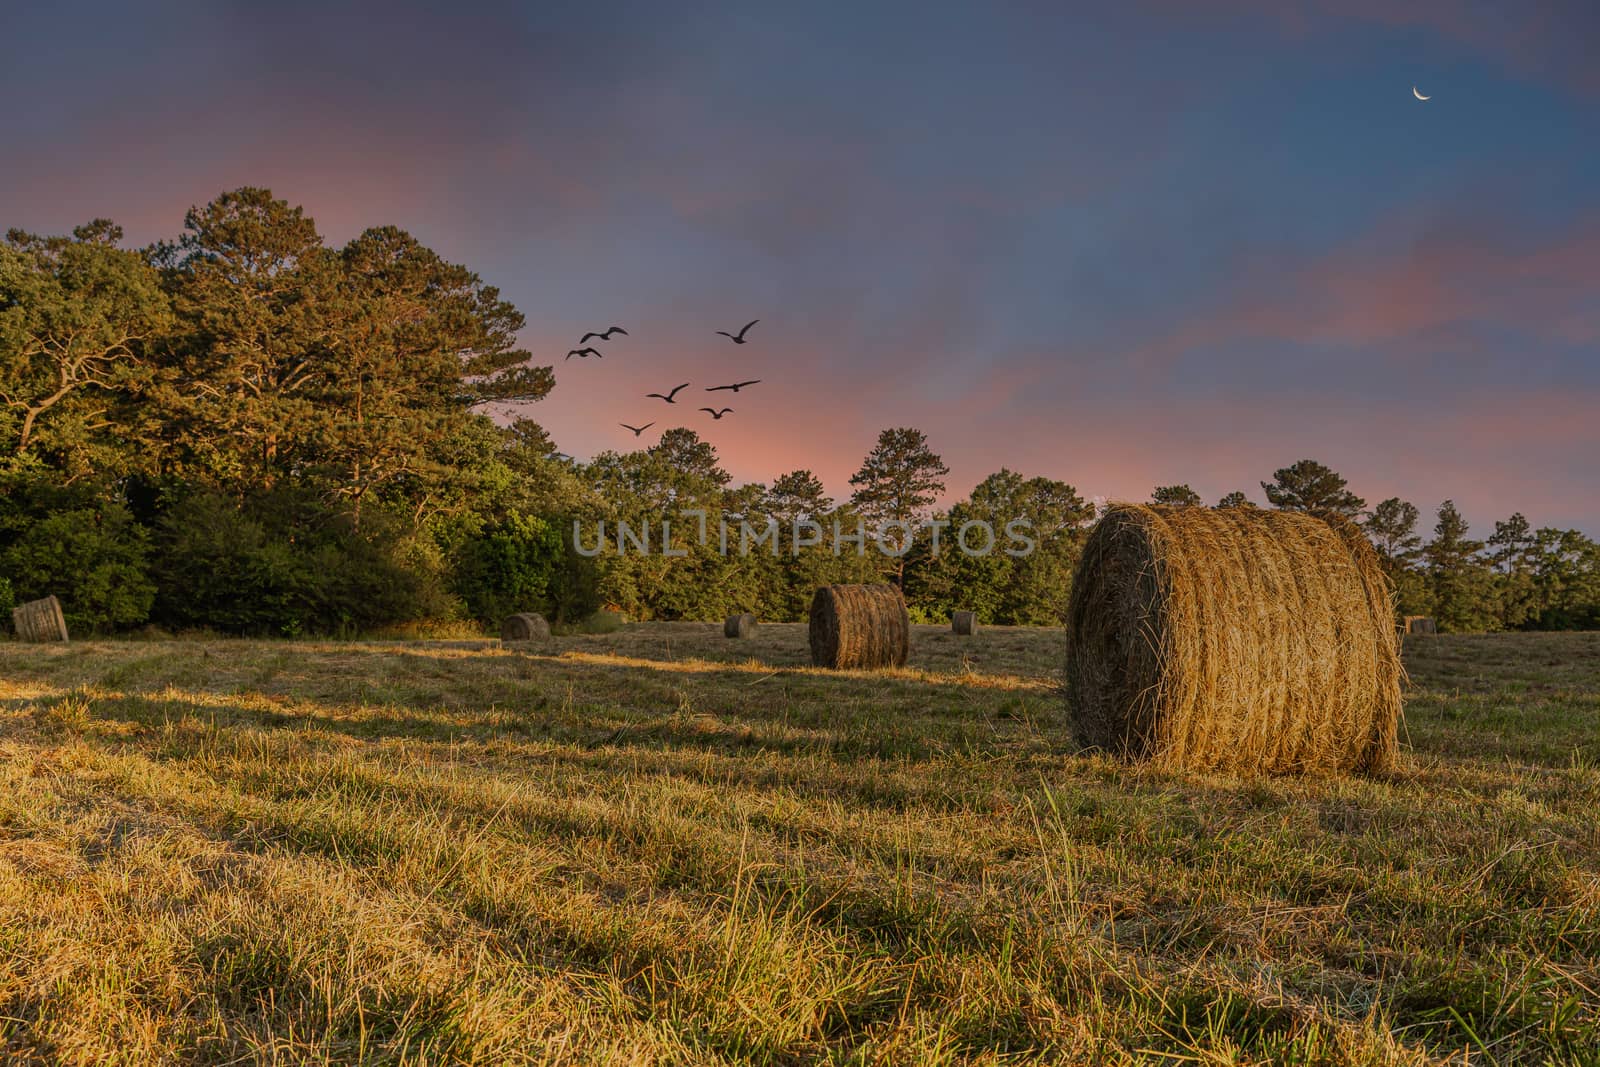 Rolls of Hay in a Freshly Harvested Field in Late Afternoon Warm LIght